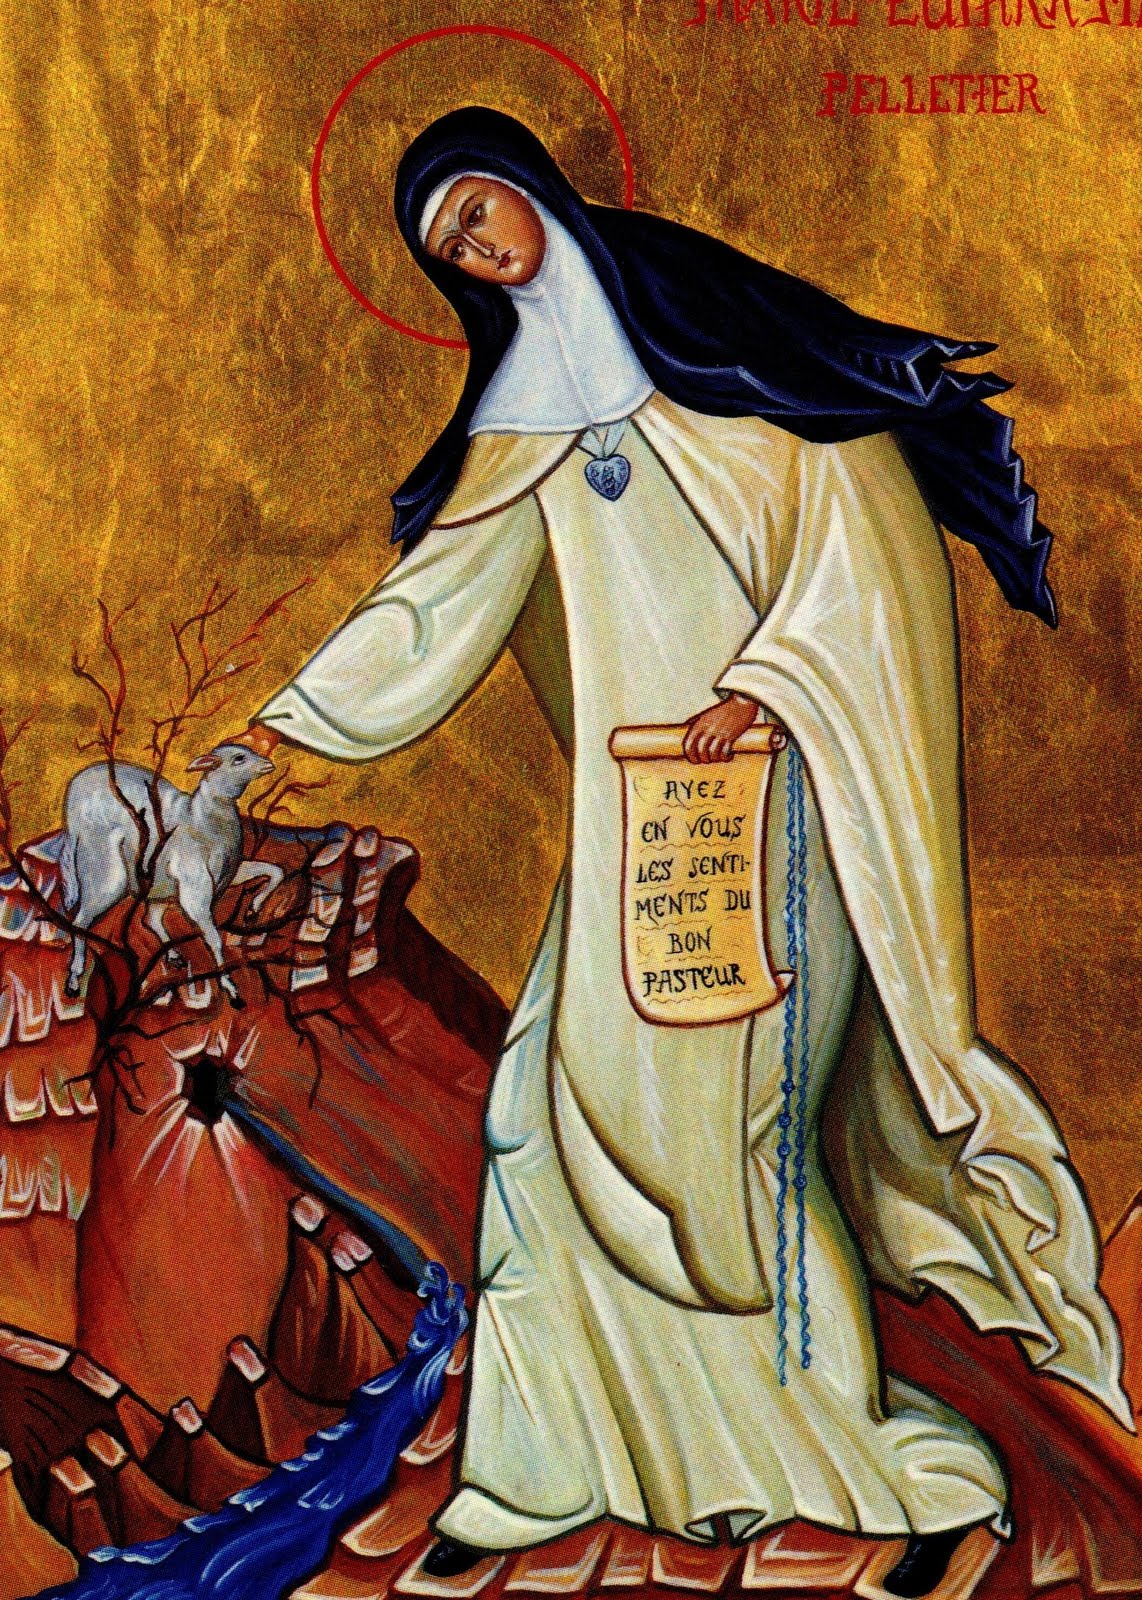 80 years since the Canonisation we celebrate the charism of our Foundress.